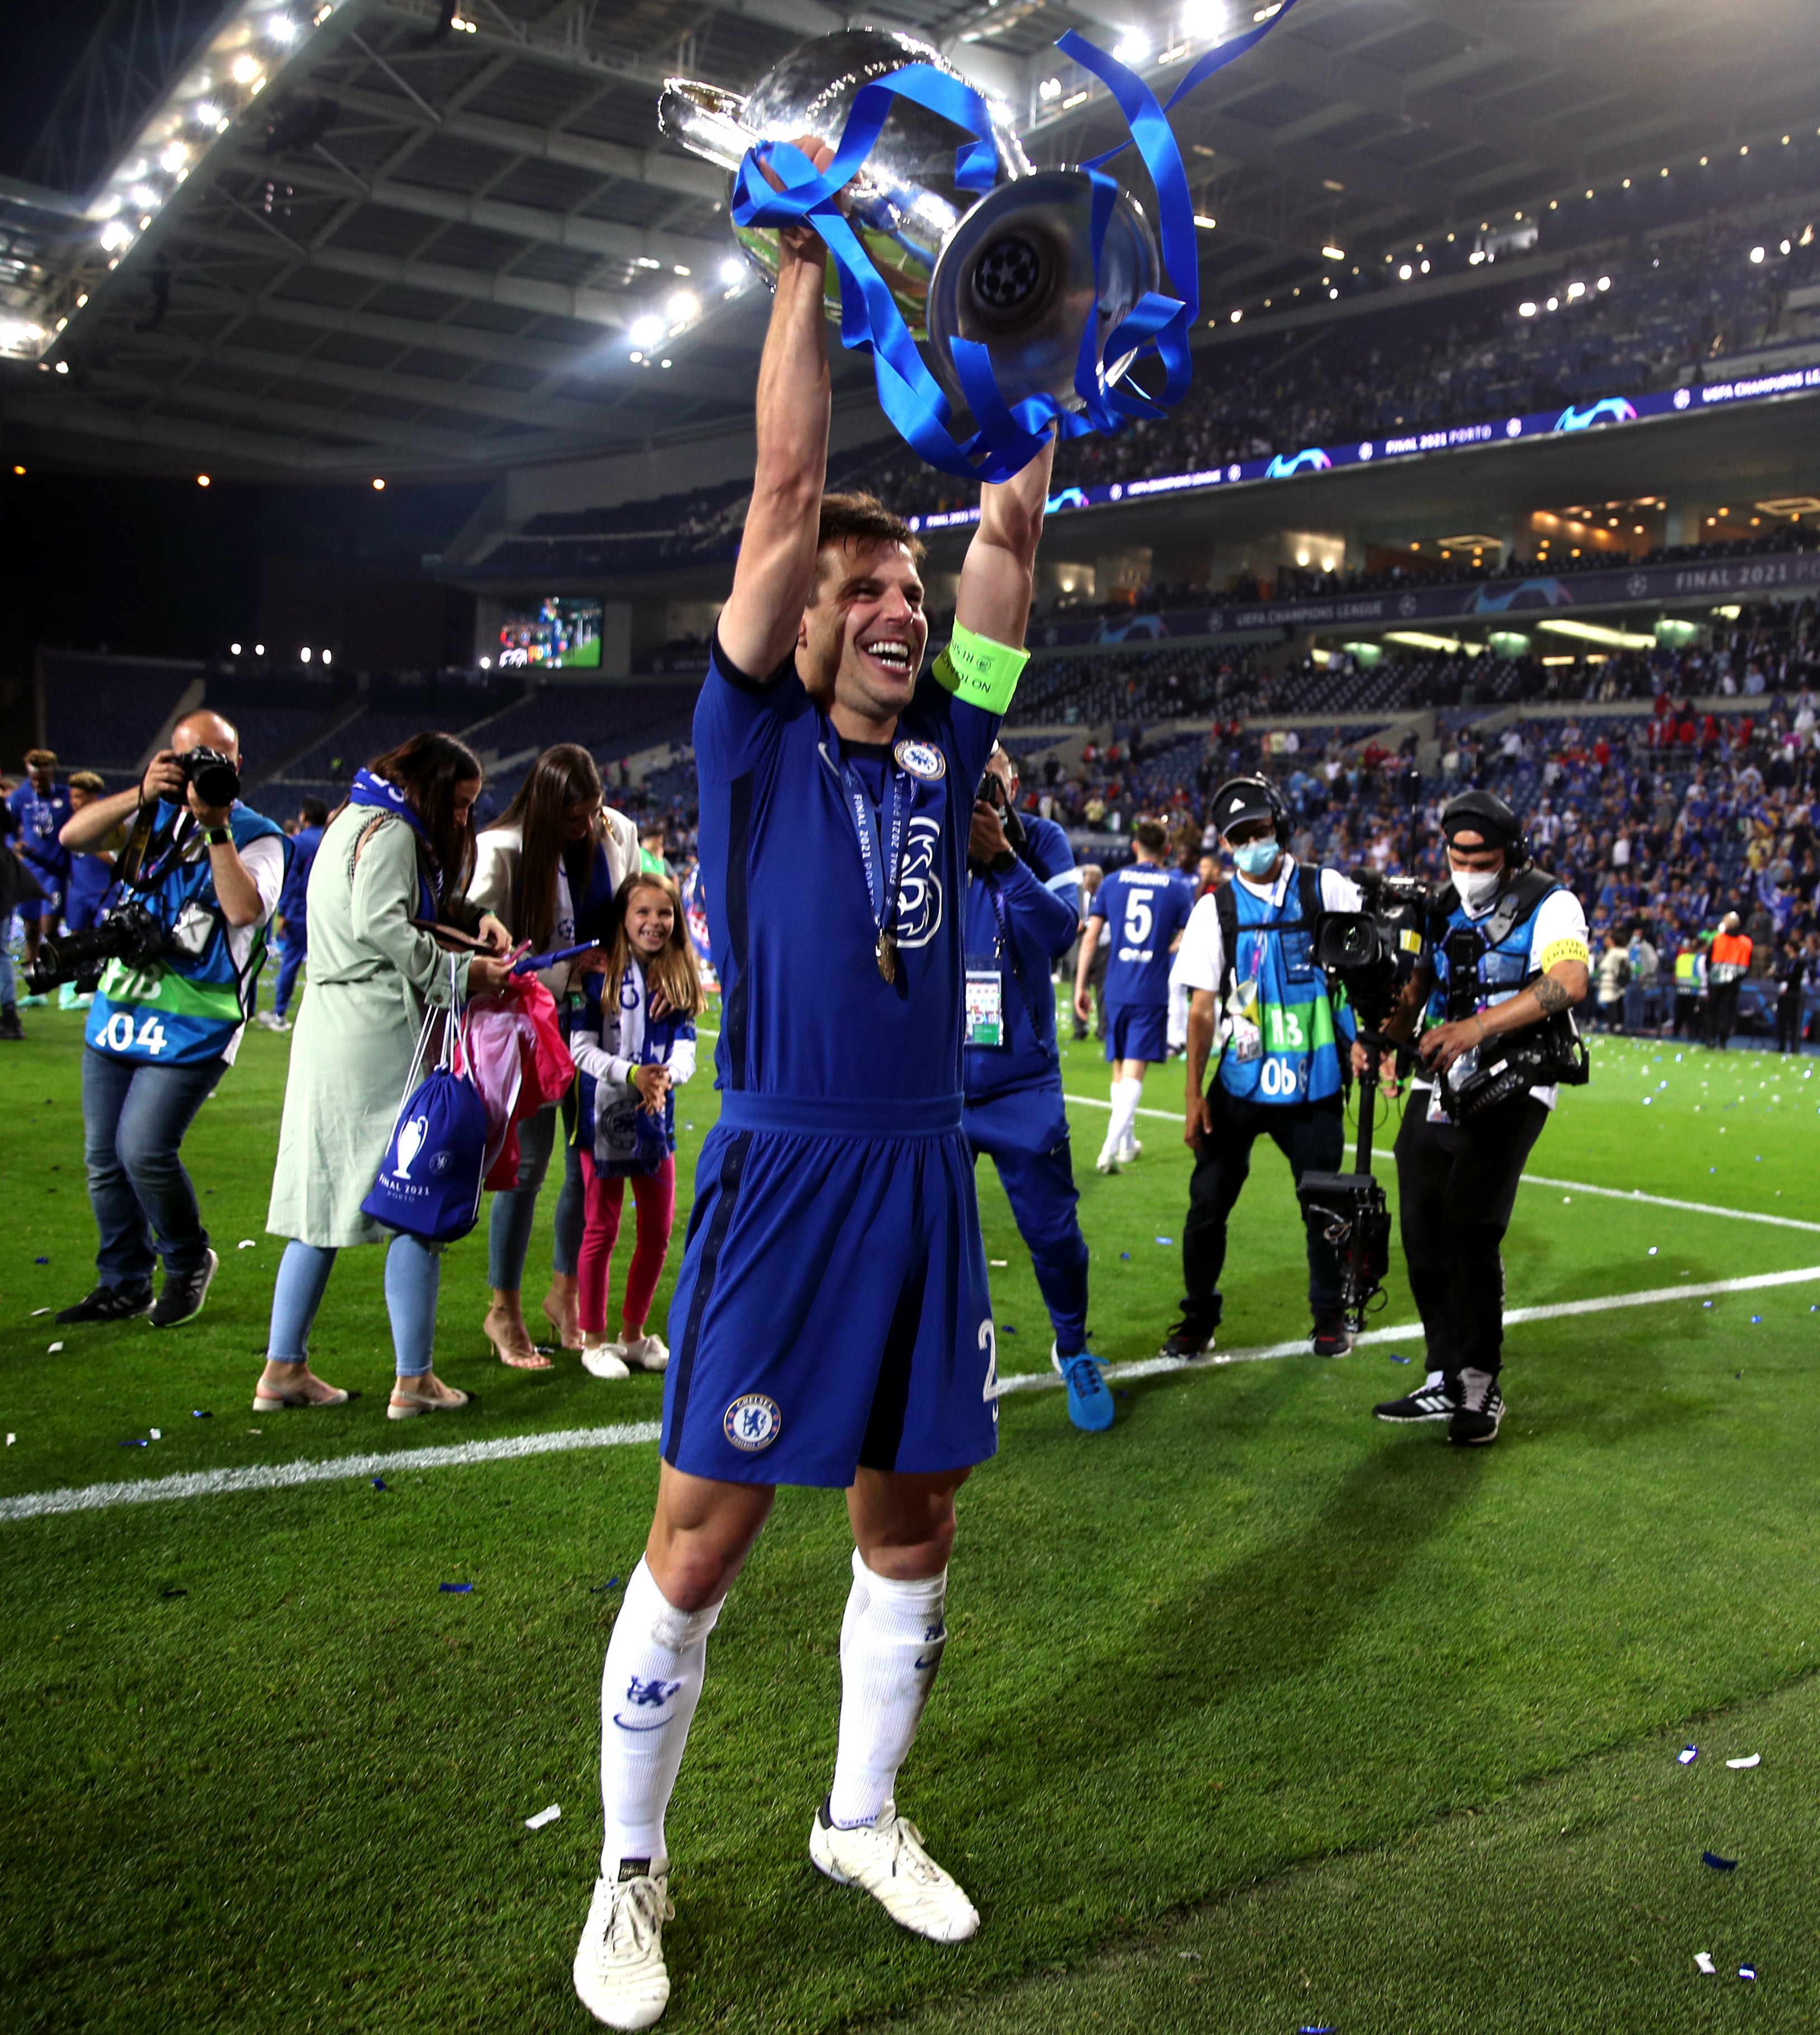 Cesar Azpilicueta, pictured, has revealed the maelstrom of emotions swirling round Chelsea's Champions League triumph